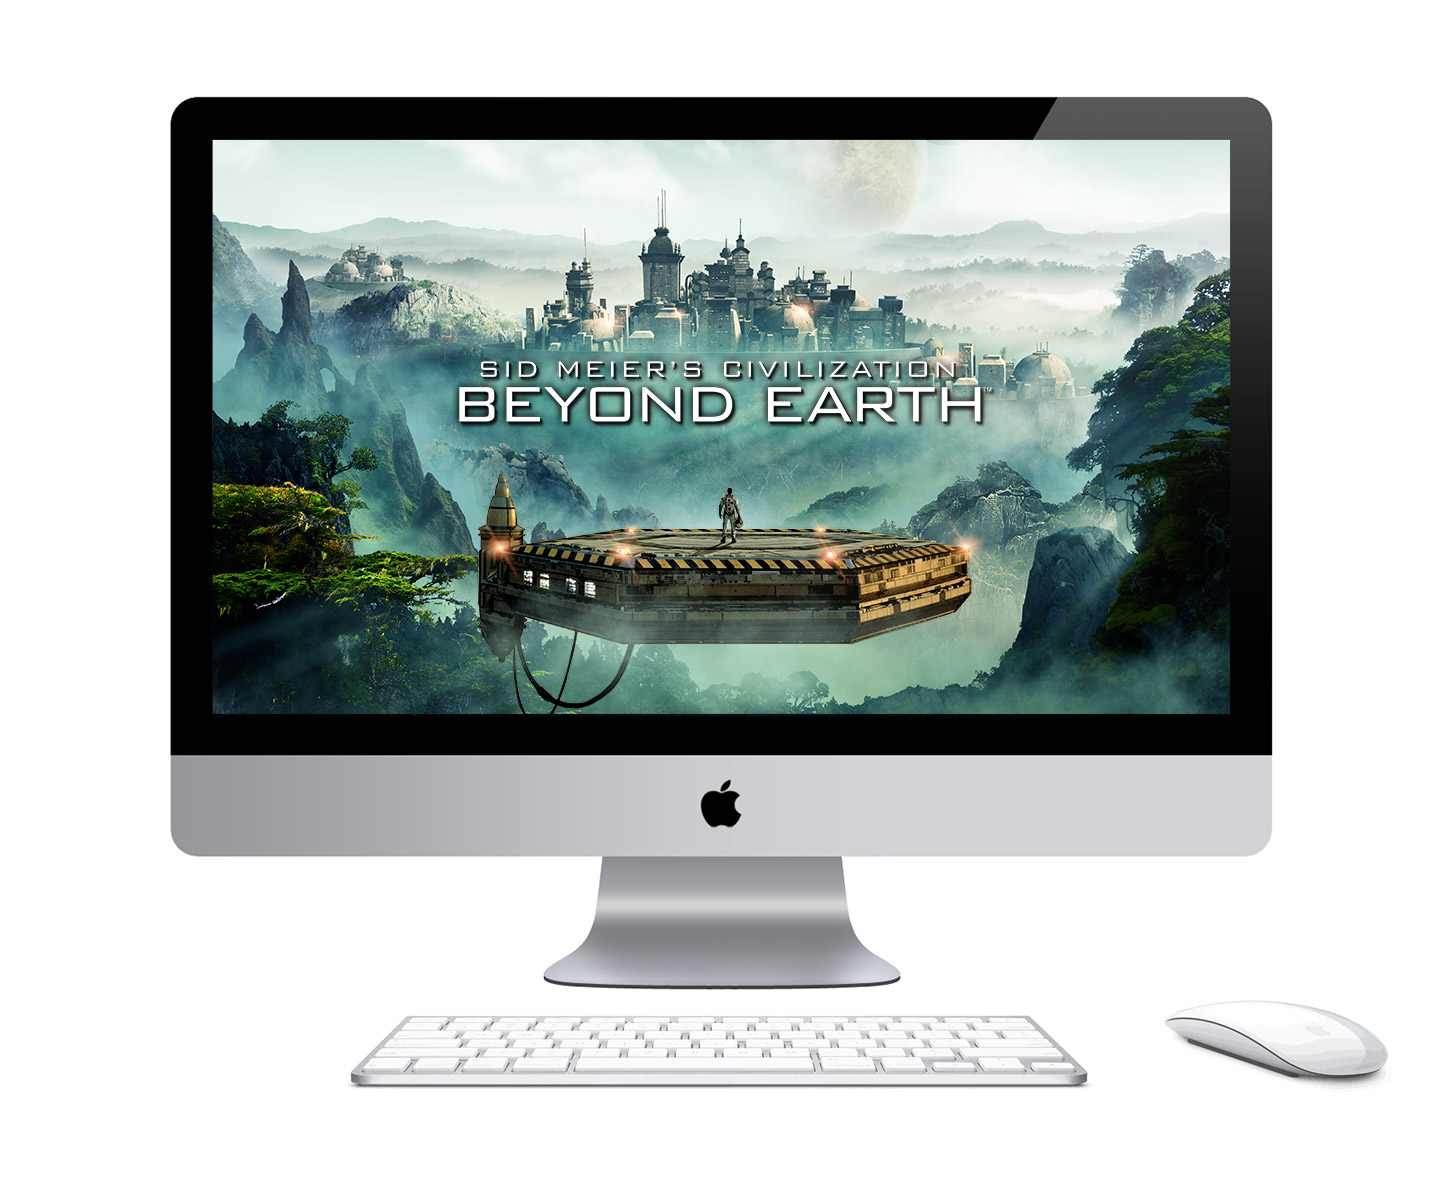 iphone xs civilization beyond earth